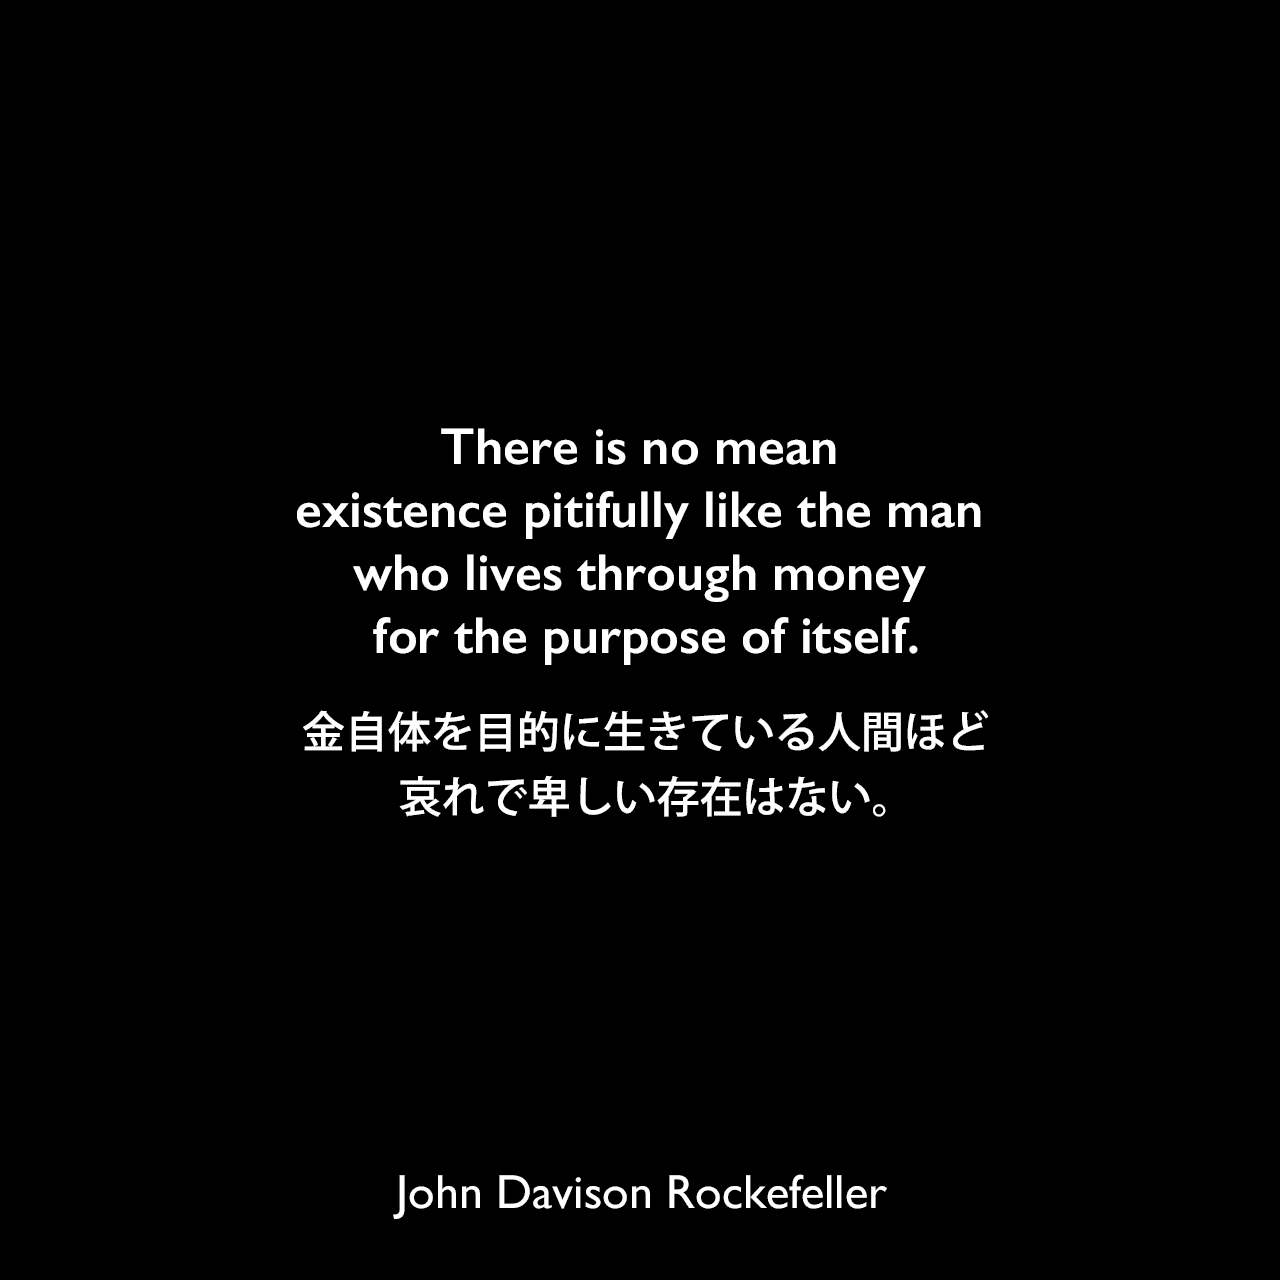 There is no mean existence pitifully like the man who lives through money for the purpose of itself.金自体を目的に生きている人間ほど、哀れで卑しい存在はない。John Davison Rockefeller